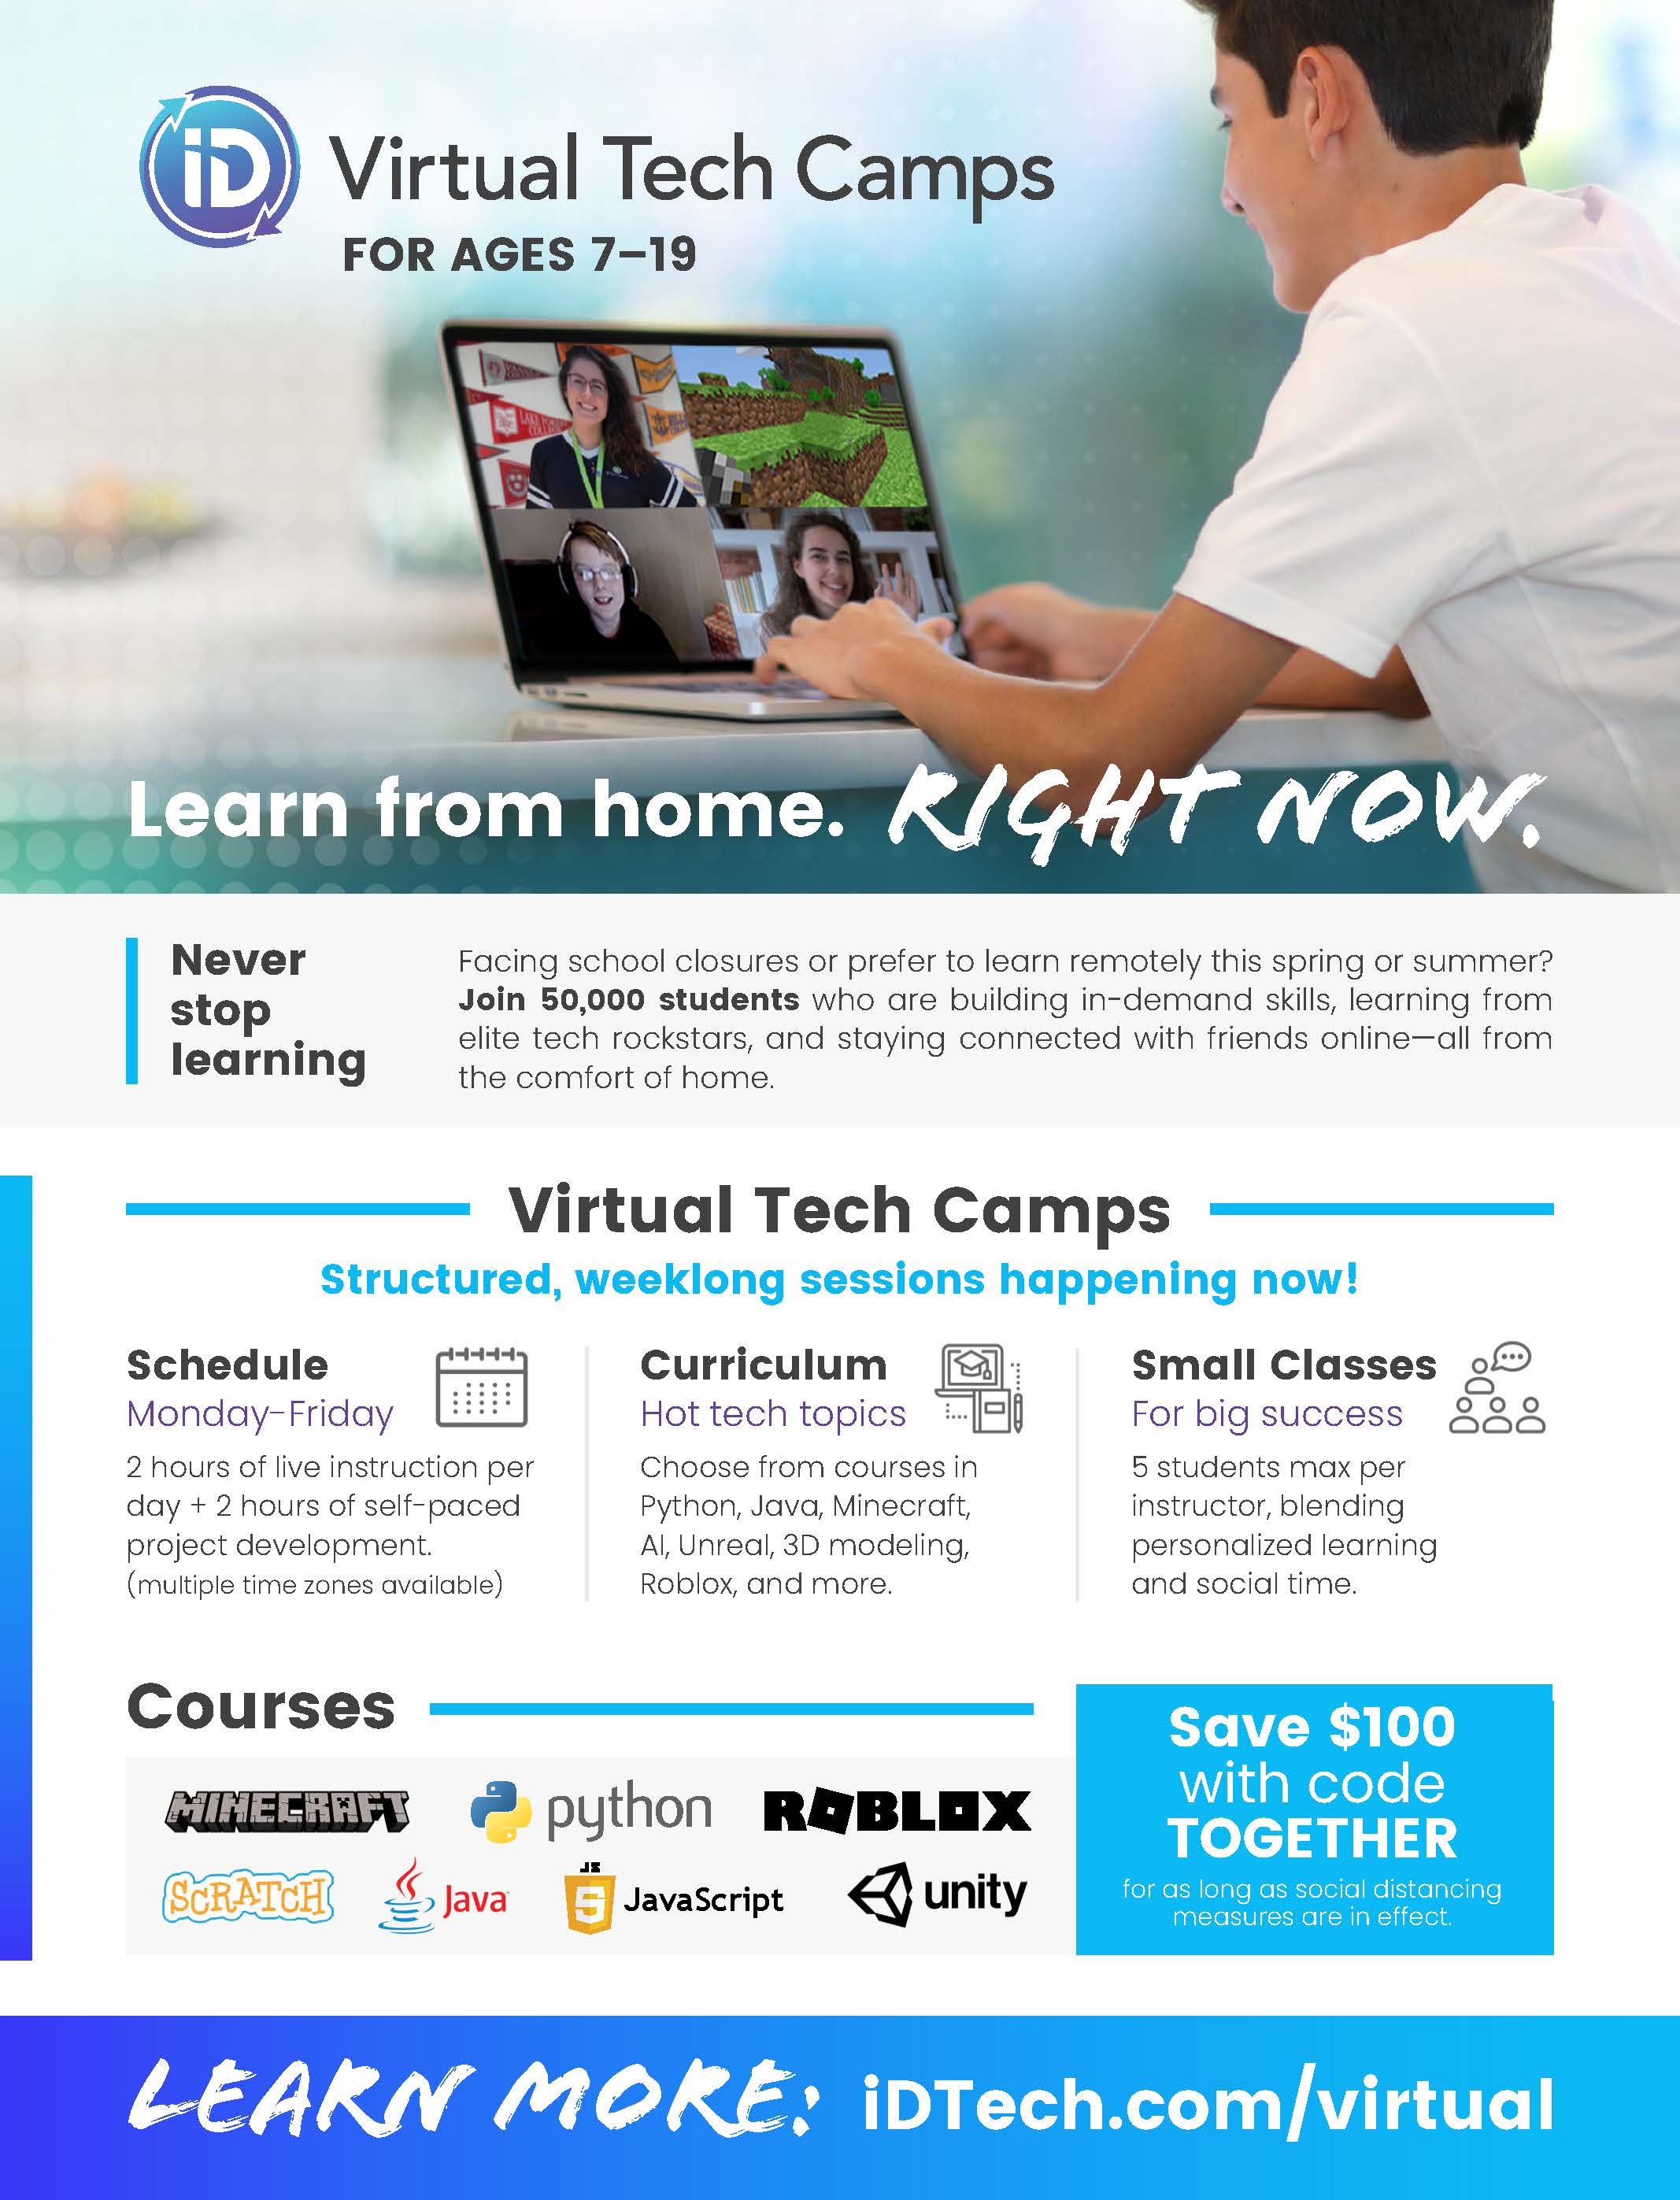 https://www.usfamilyguide.com/_emailattachments/iDTechVirtualTechCamps2020Page1.jpg